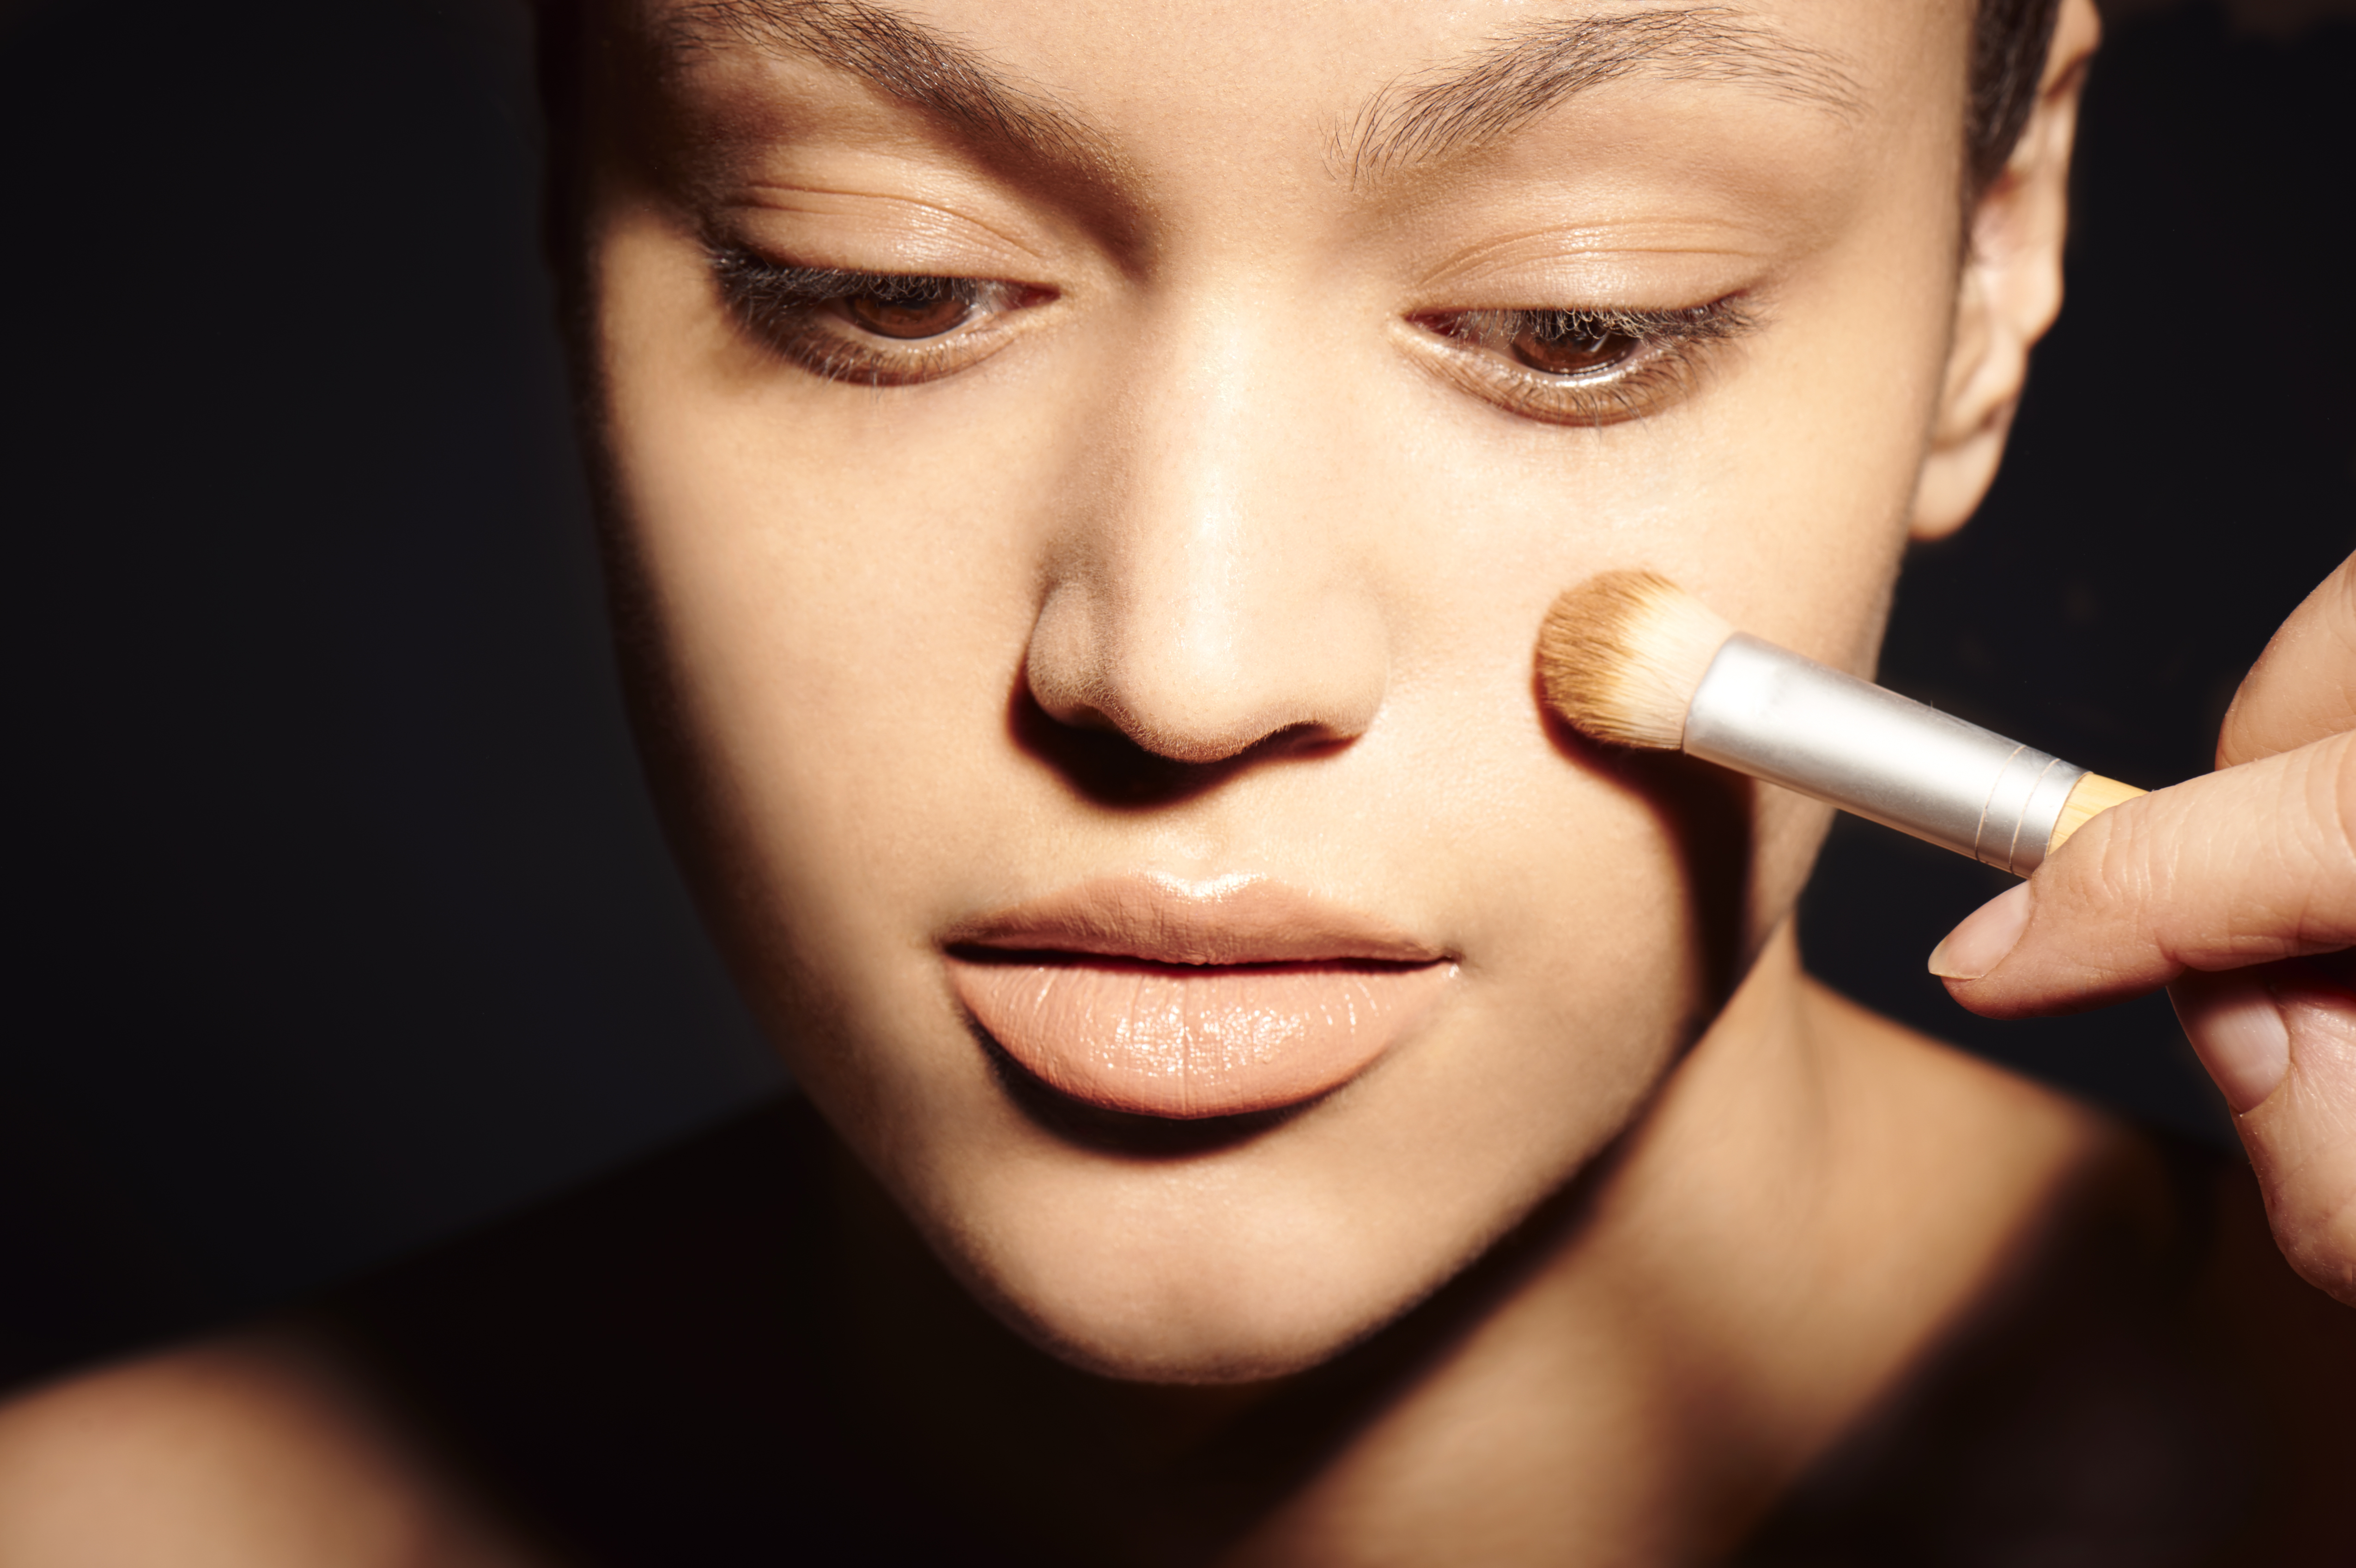  6 foundation mistakes to avoid for a natural-looking base, according to a make-up artist 